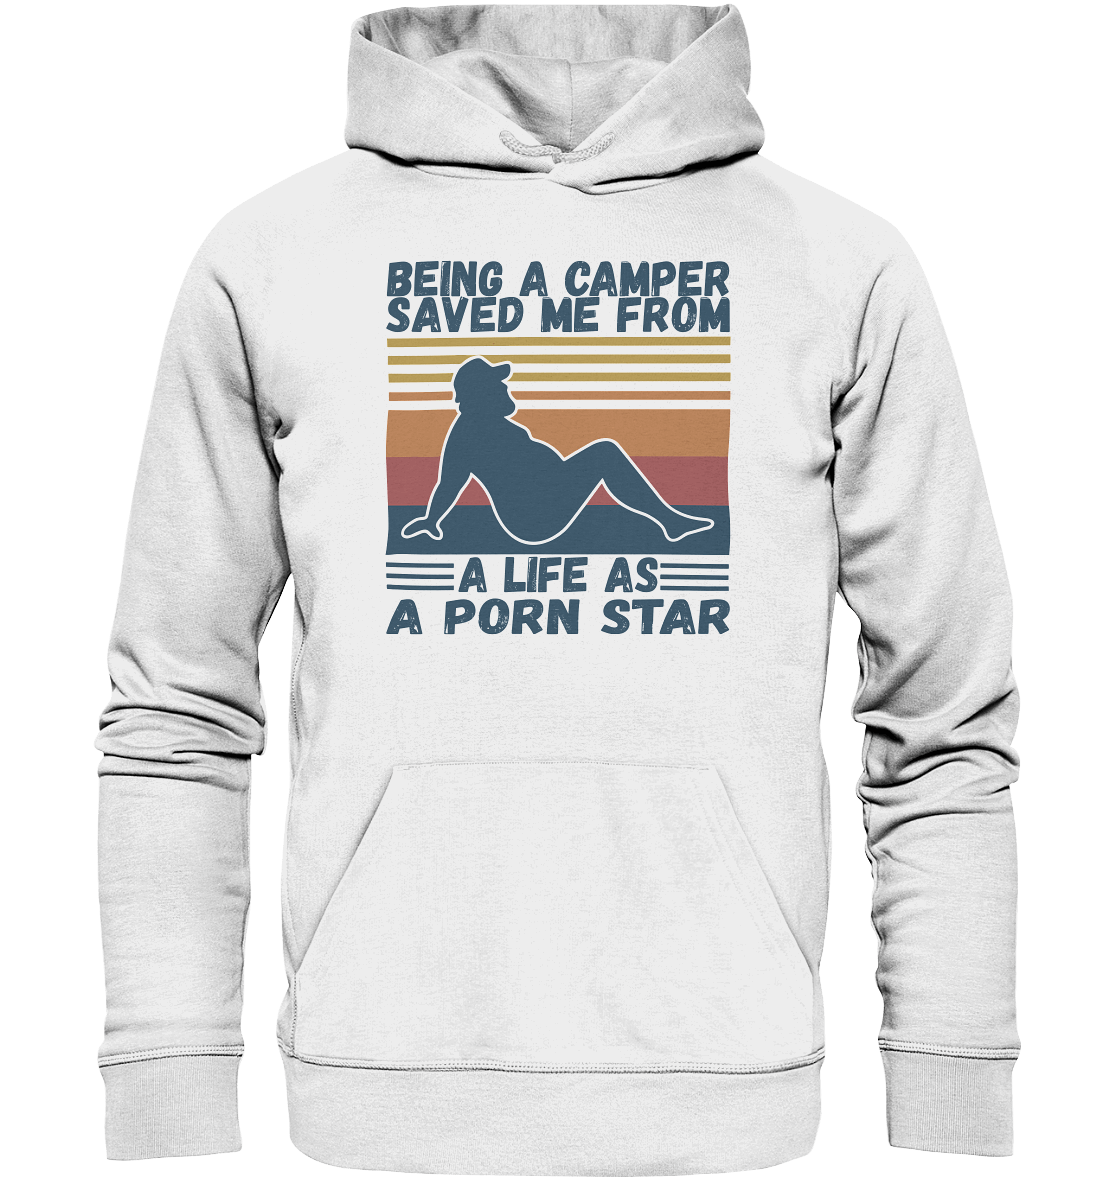 Being A Camper Saved Me From A Life As A Porn Star - Organic Basic Hoodie